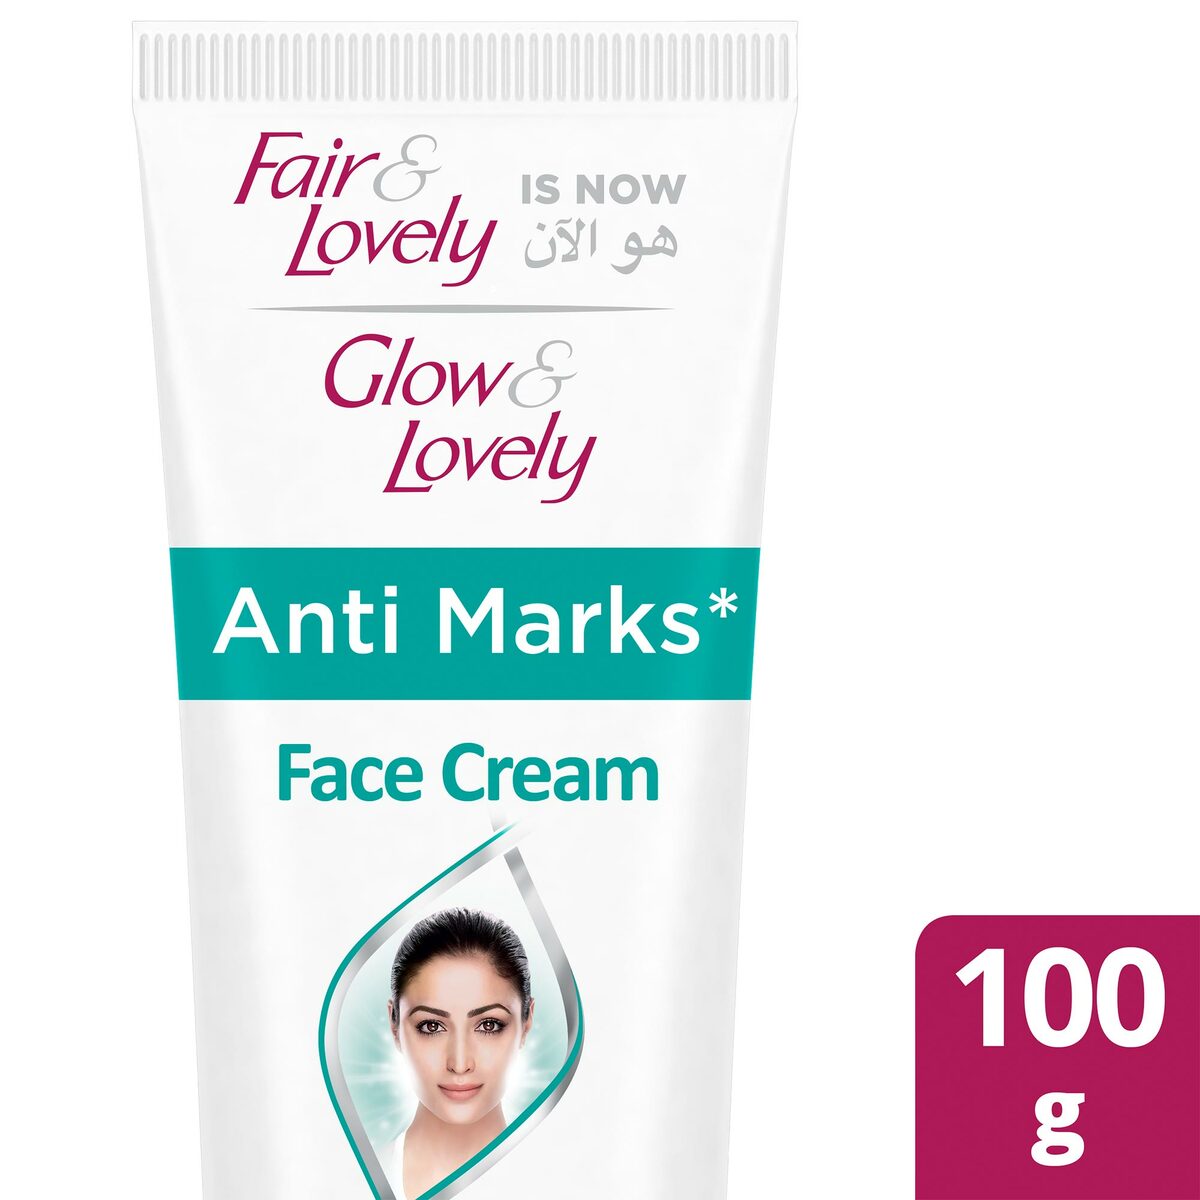 Glow & Lovely Face Cream Anti-Marks Spot-Less Glow 100 g